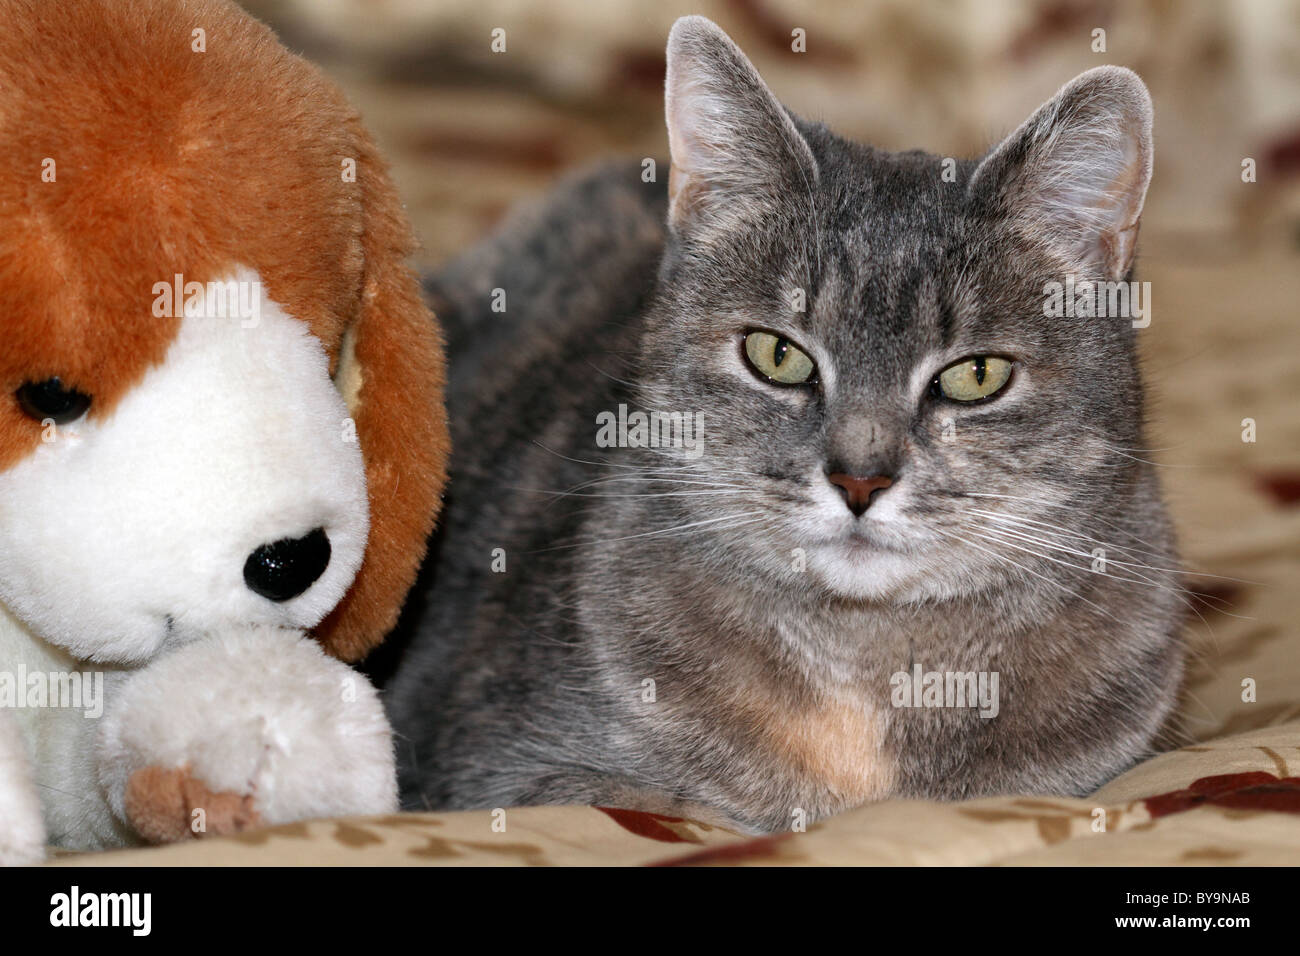 A Housecat sitting next to its friend - a stuffed Beagle Dog toy. Photo is of the Photographer's Mother's cat. Stock Photo